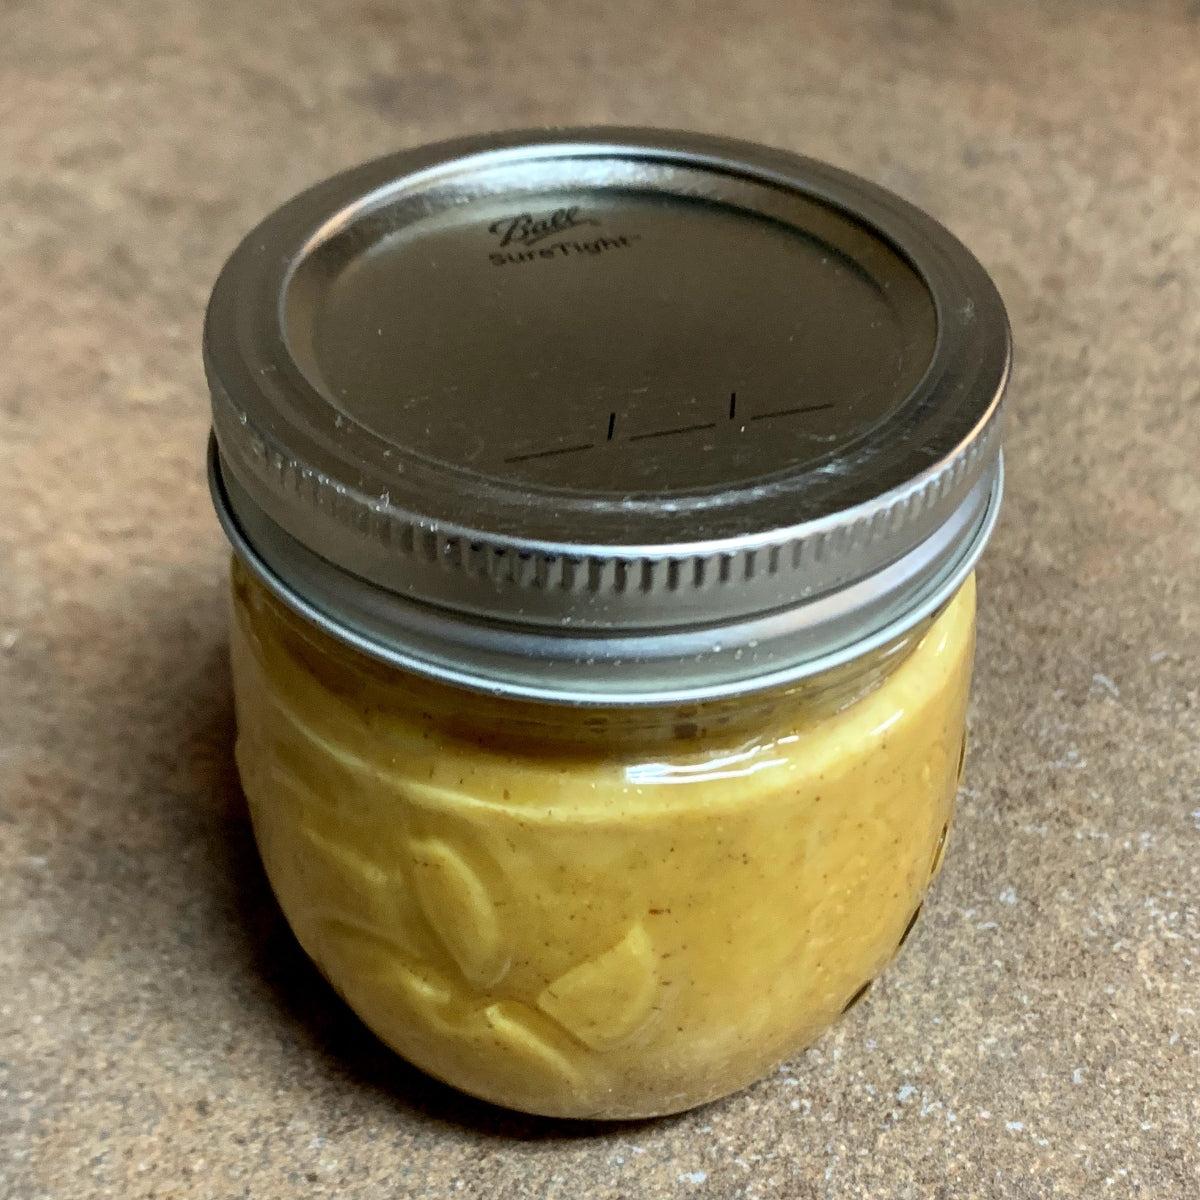 Honey Gold Sauce in a tightened container.